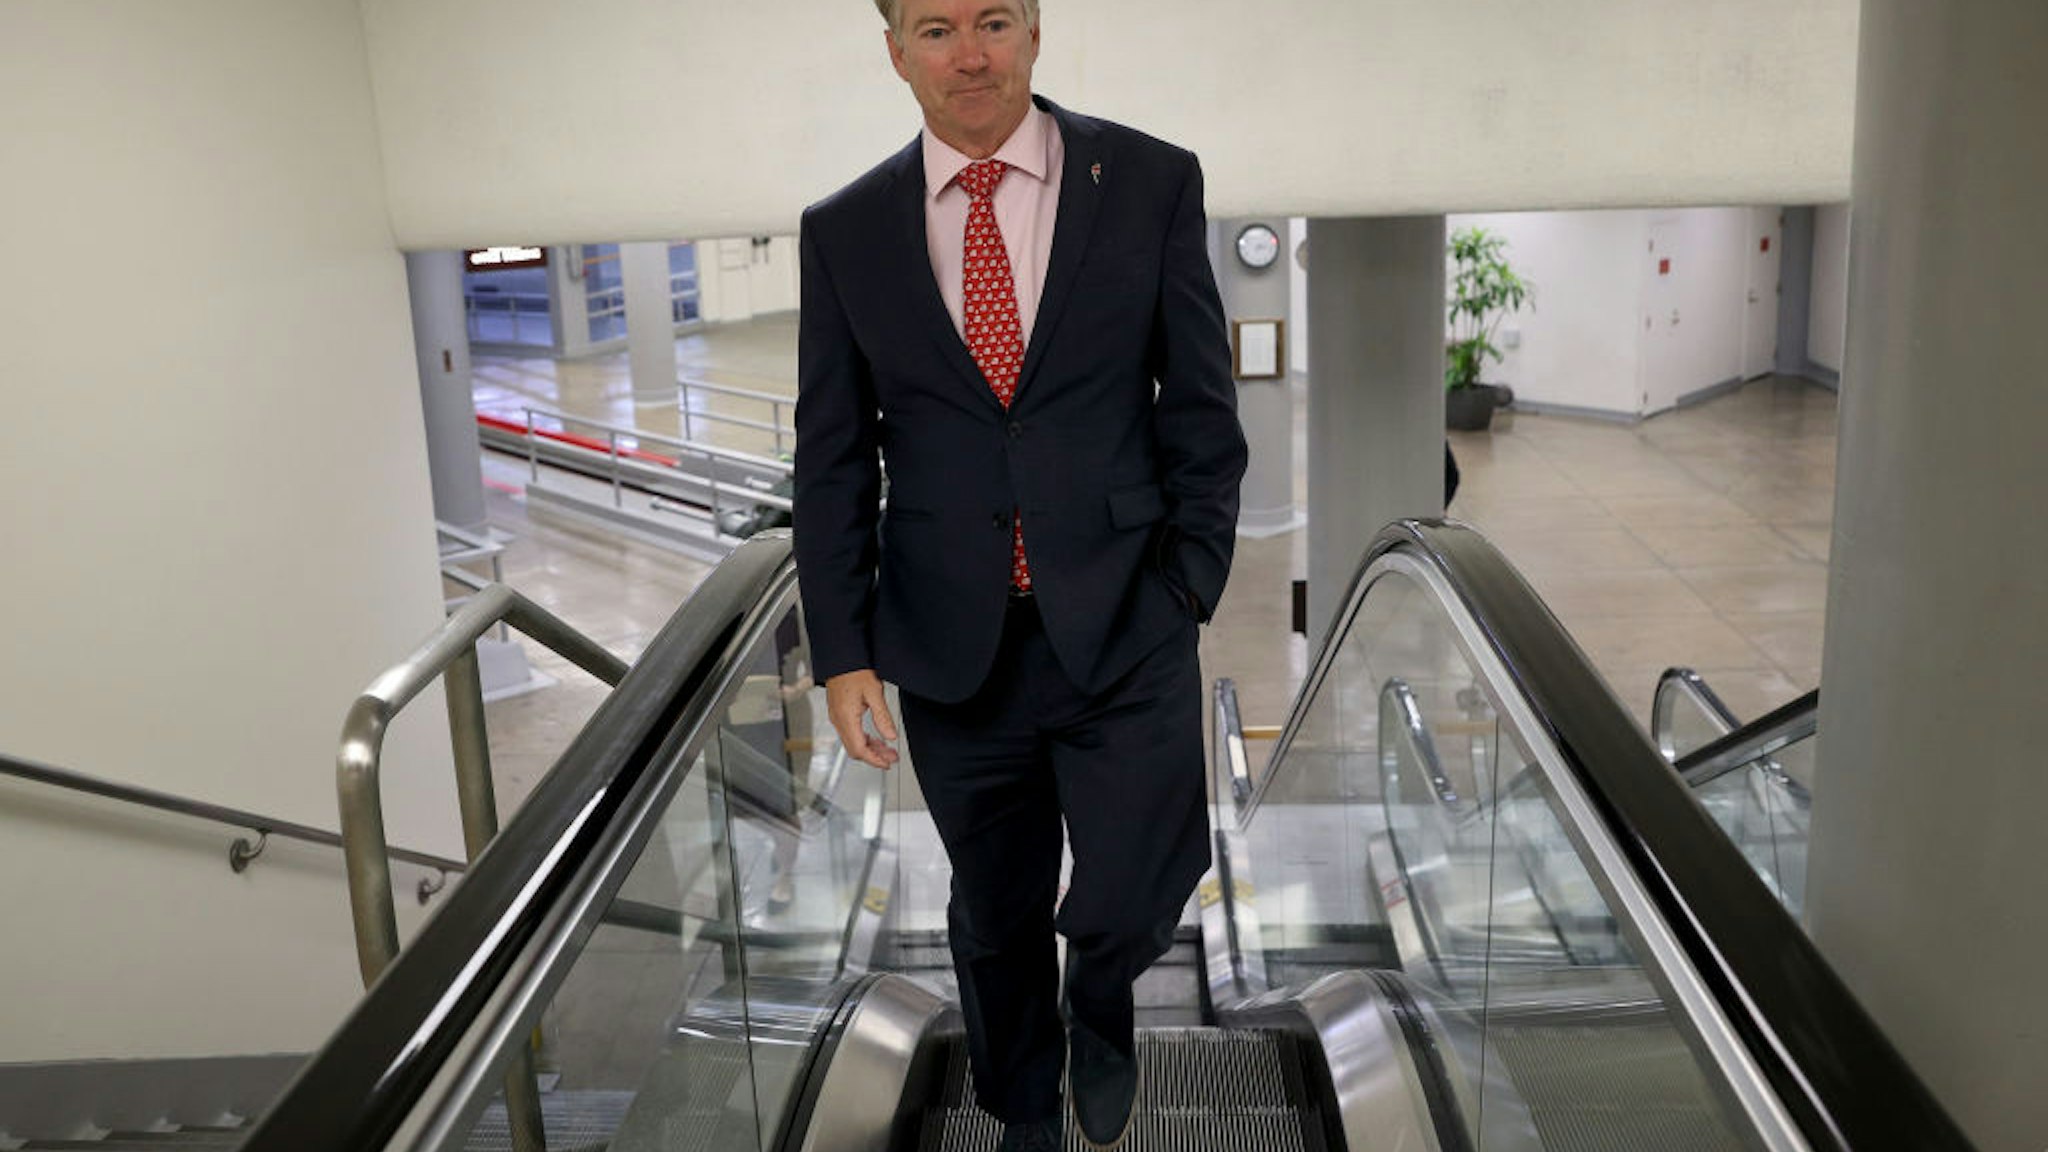 WASHINGTON, DC - MARCH 18: U.S. Sen. Rand Paul (R-KY) arrives at the U.S. Capitol for a vote on March 18, 2020 in Washington, DC. Senate Majority Leader Mitch McConnell is urging members of the Senate to pass as soon as possible a second COVID-19 funding bill already passed by the House. (Photo by Win McNamee/Getty Images)